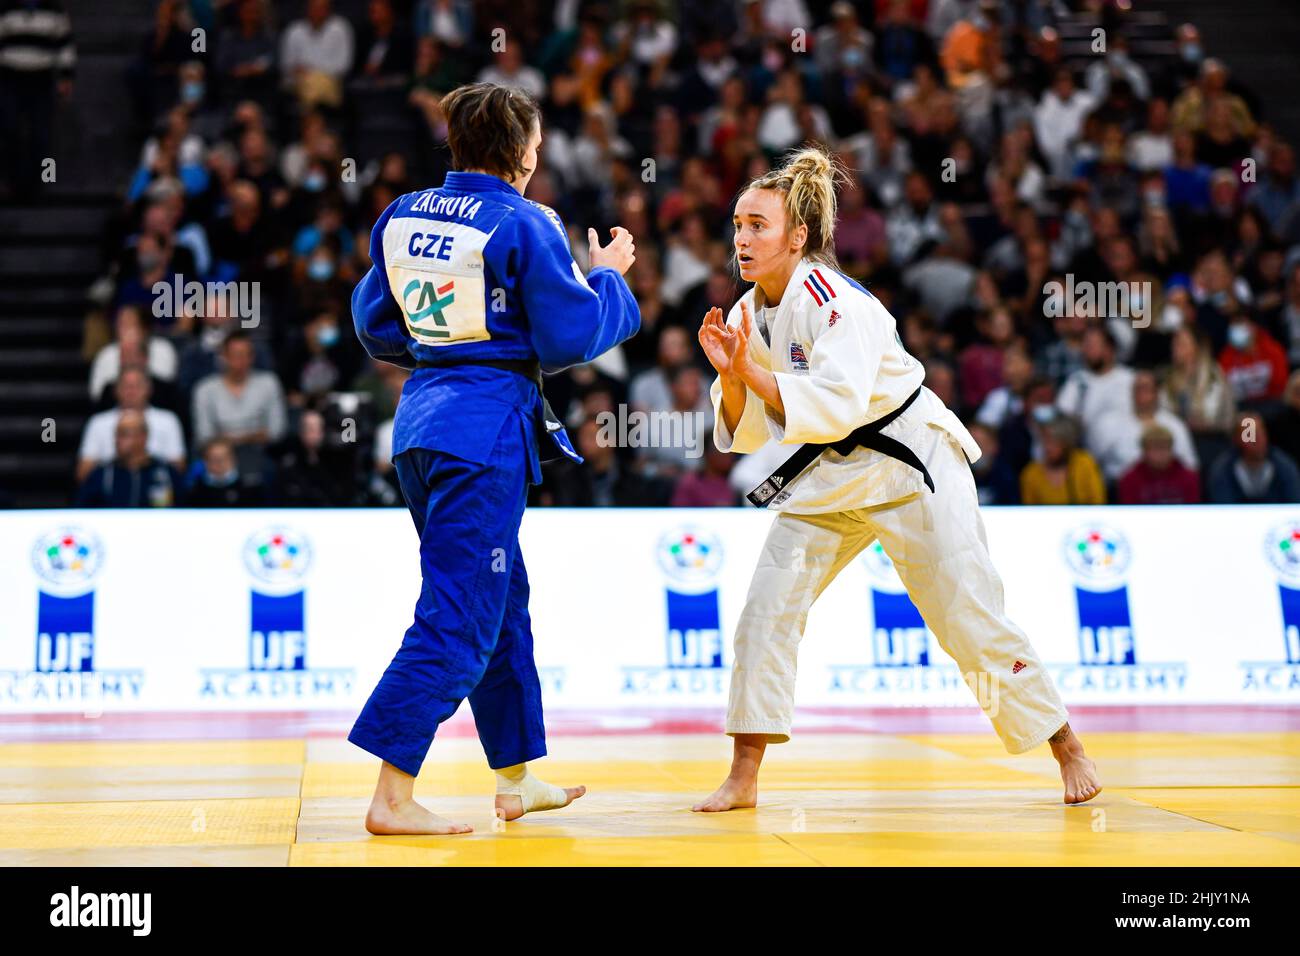 Women -63 kg, Lucy Renshall (white) of Great Britain Silver medal competes during the Paris Grand Slam 2021, Judo event on October 16, 2021 at AccorHo Stock Photo